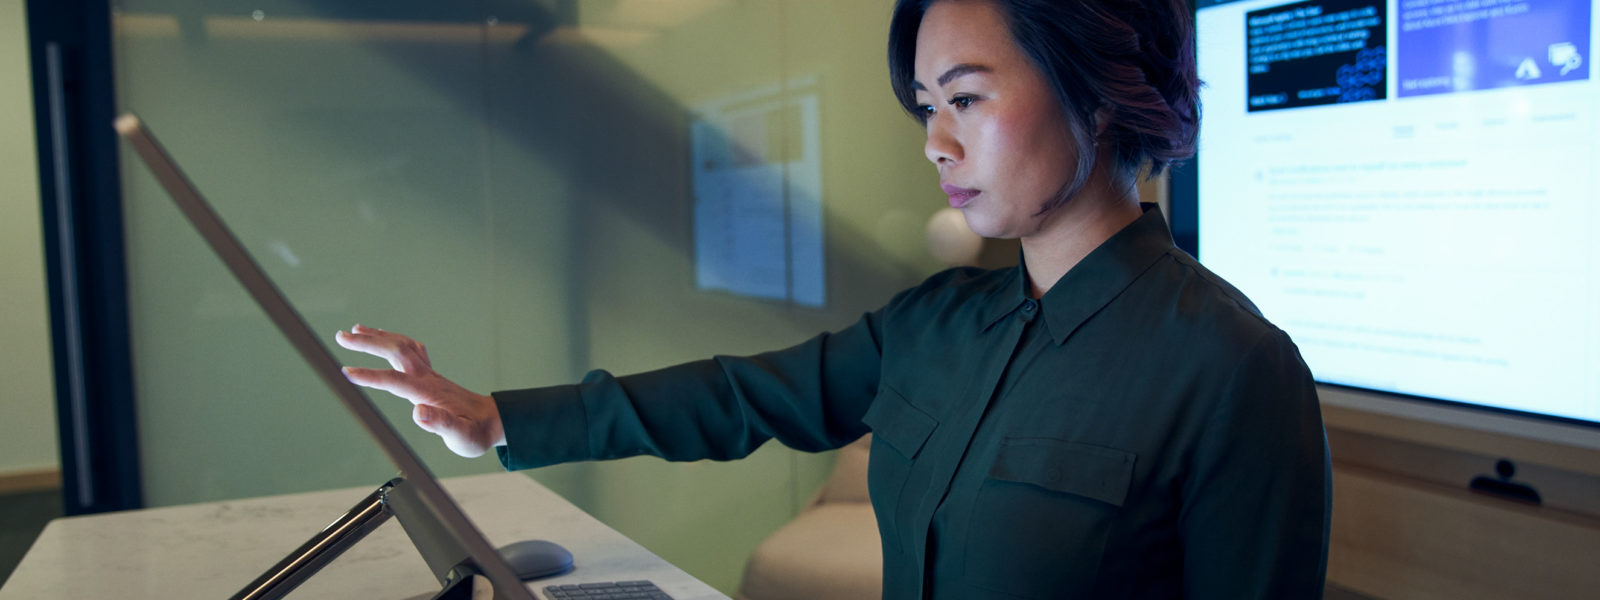 Side profile of a woman wearing a dark shirt in a dim office scrolling or working on a Microsoft Surface Studio.